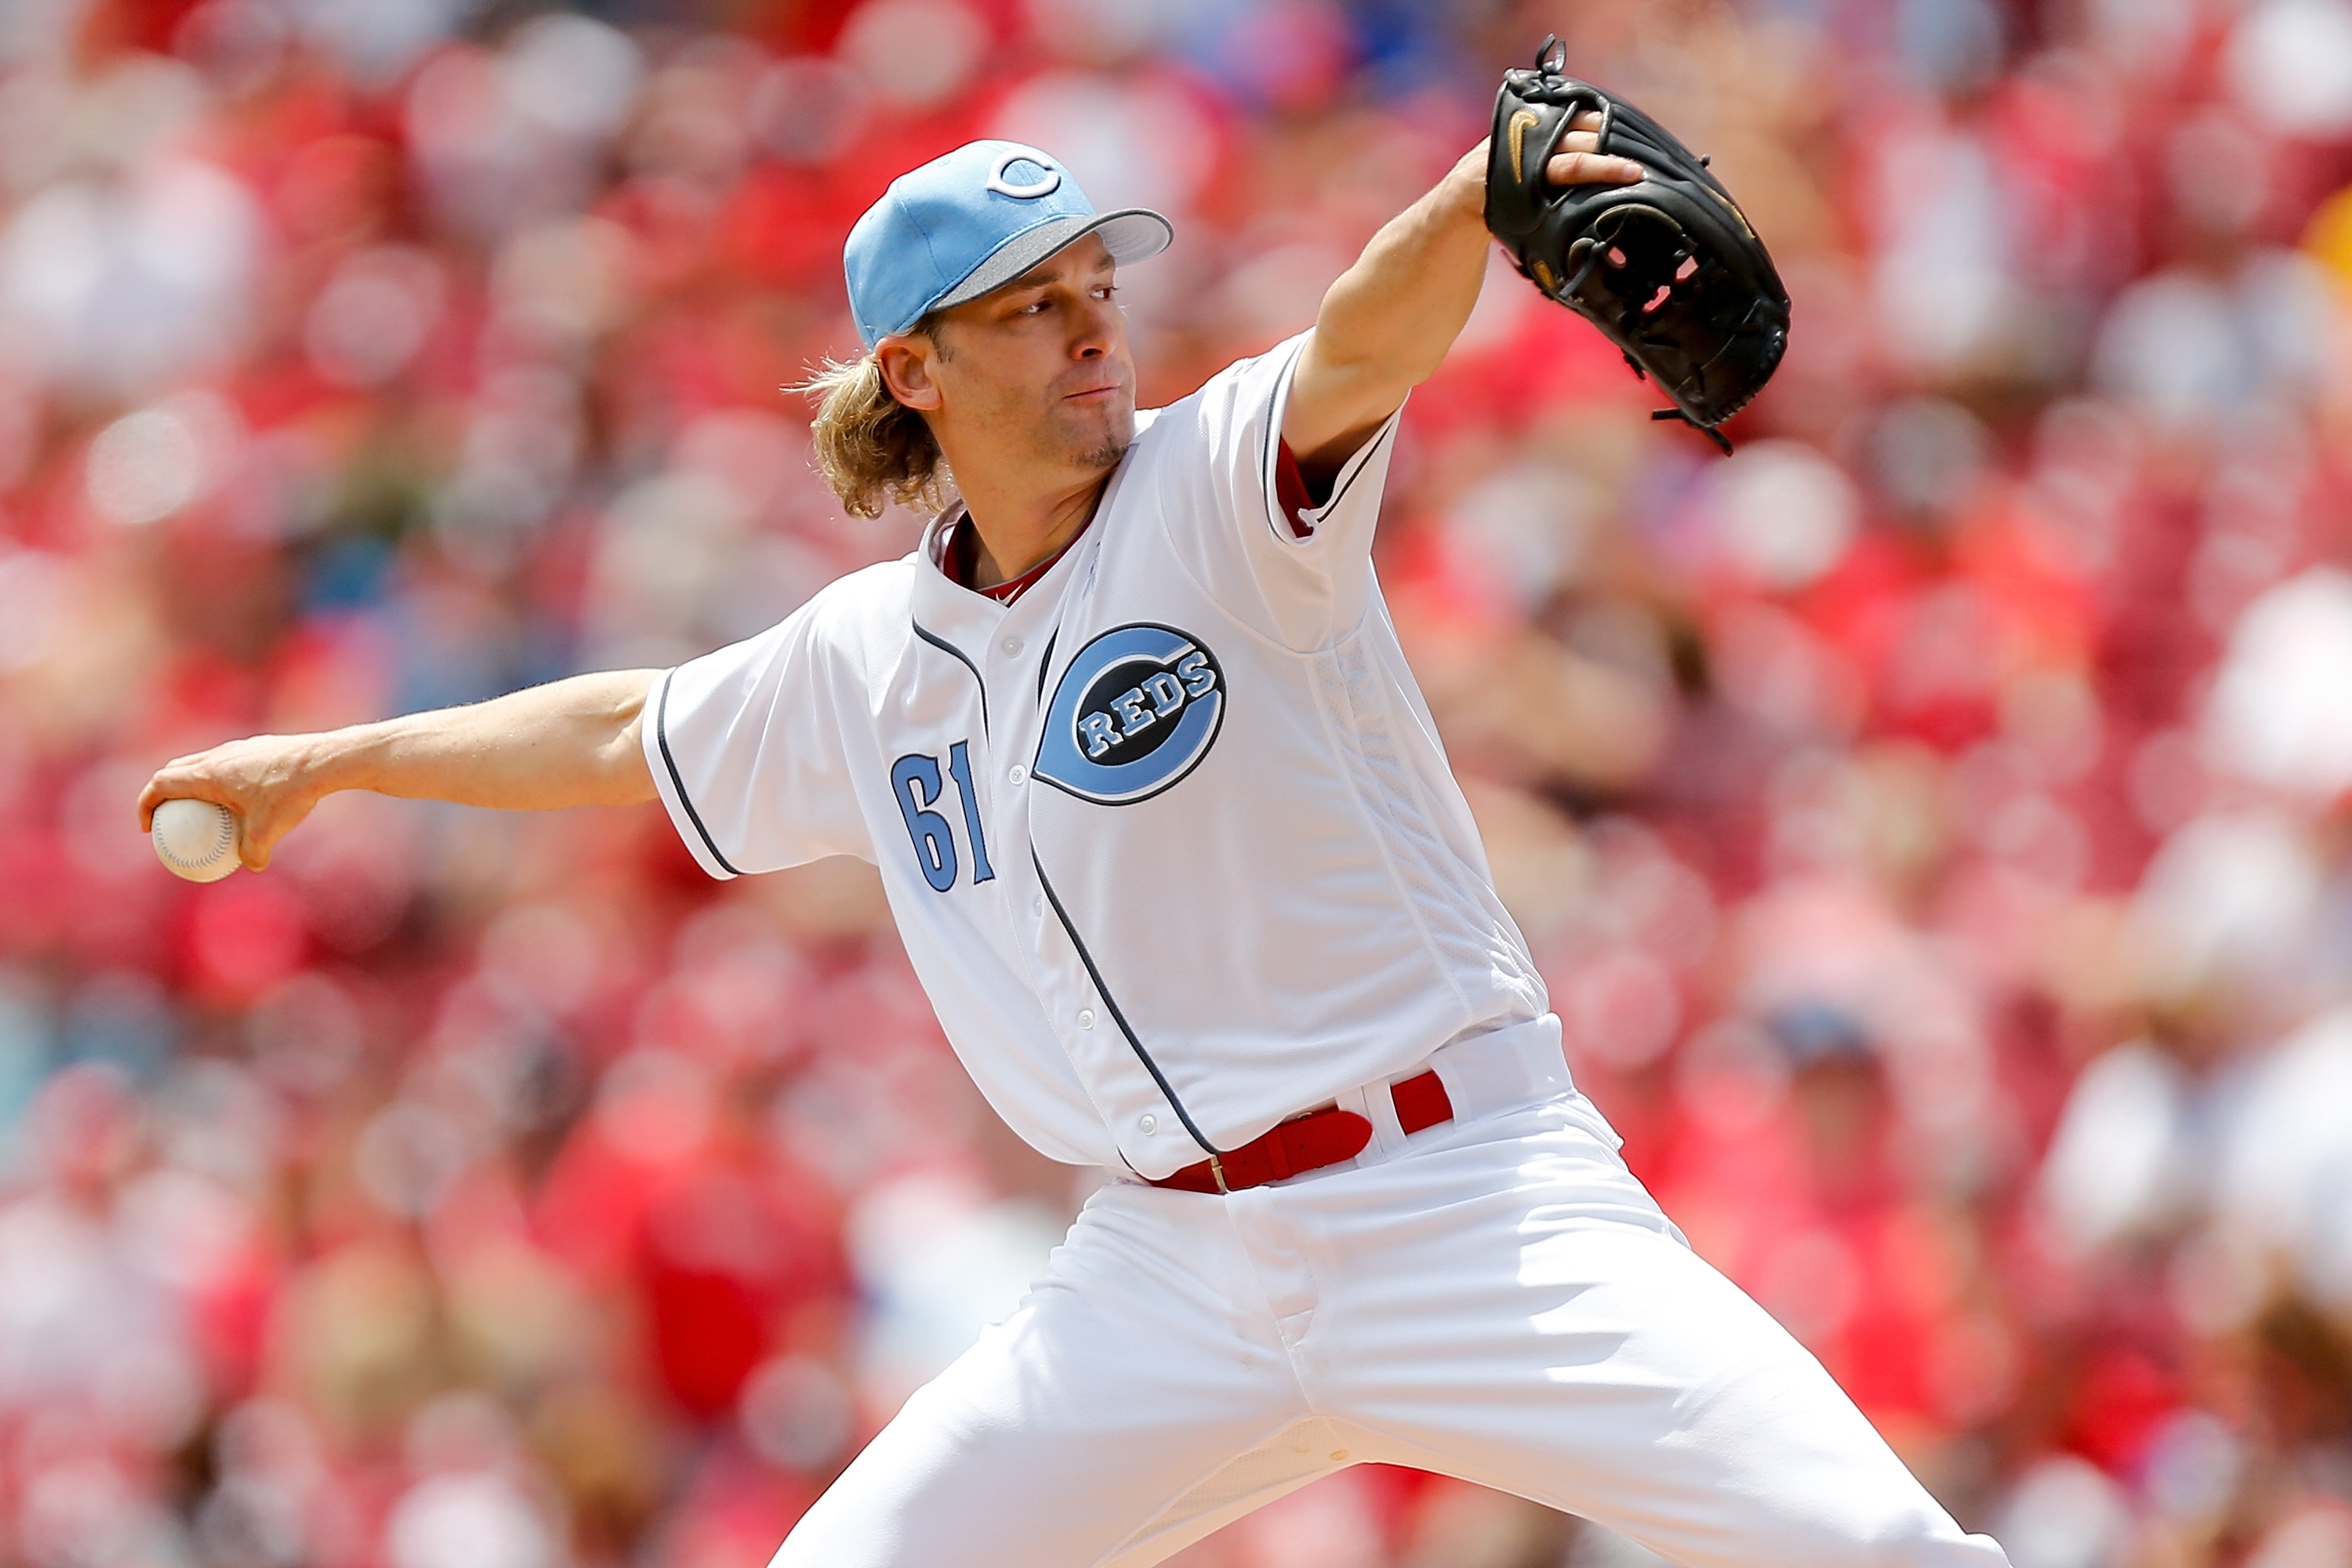 Bronson Arroyo eager for one last shot with Reds